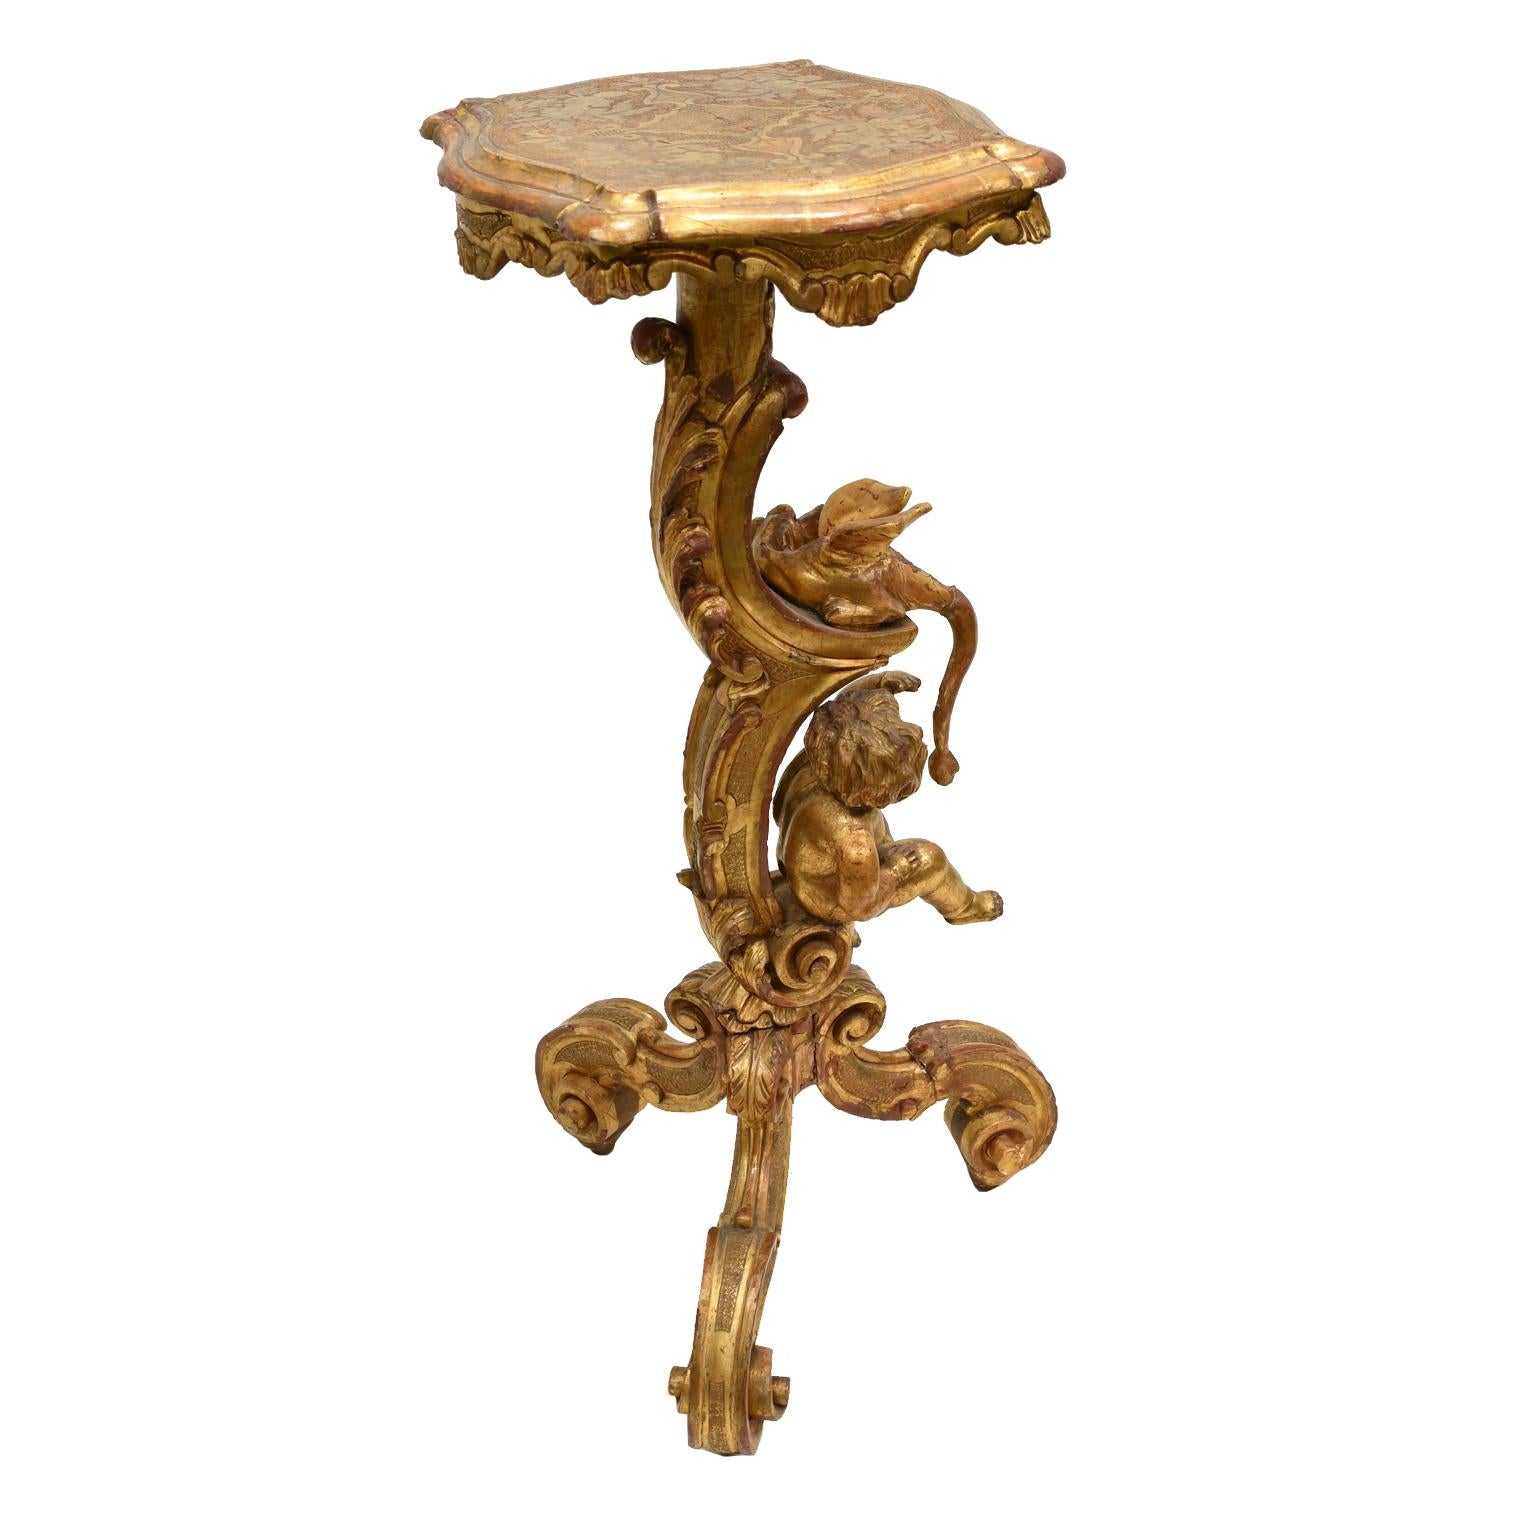 Antique Venetian Trespolo Pedestal Stand in Gilded Wood w/ Carved Dragon & Putto 4